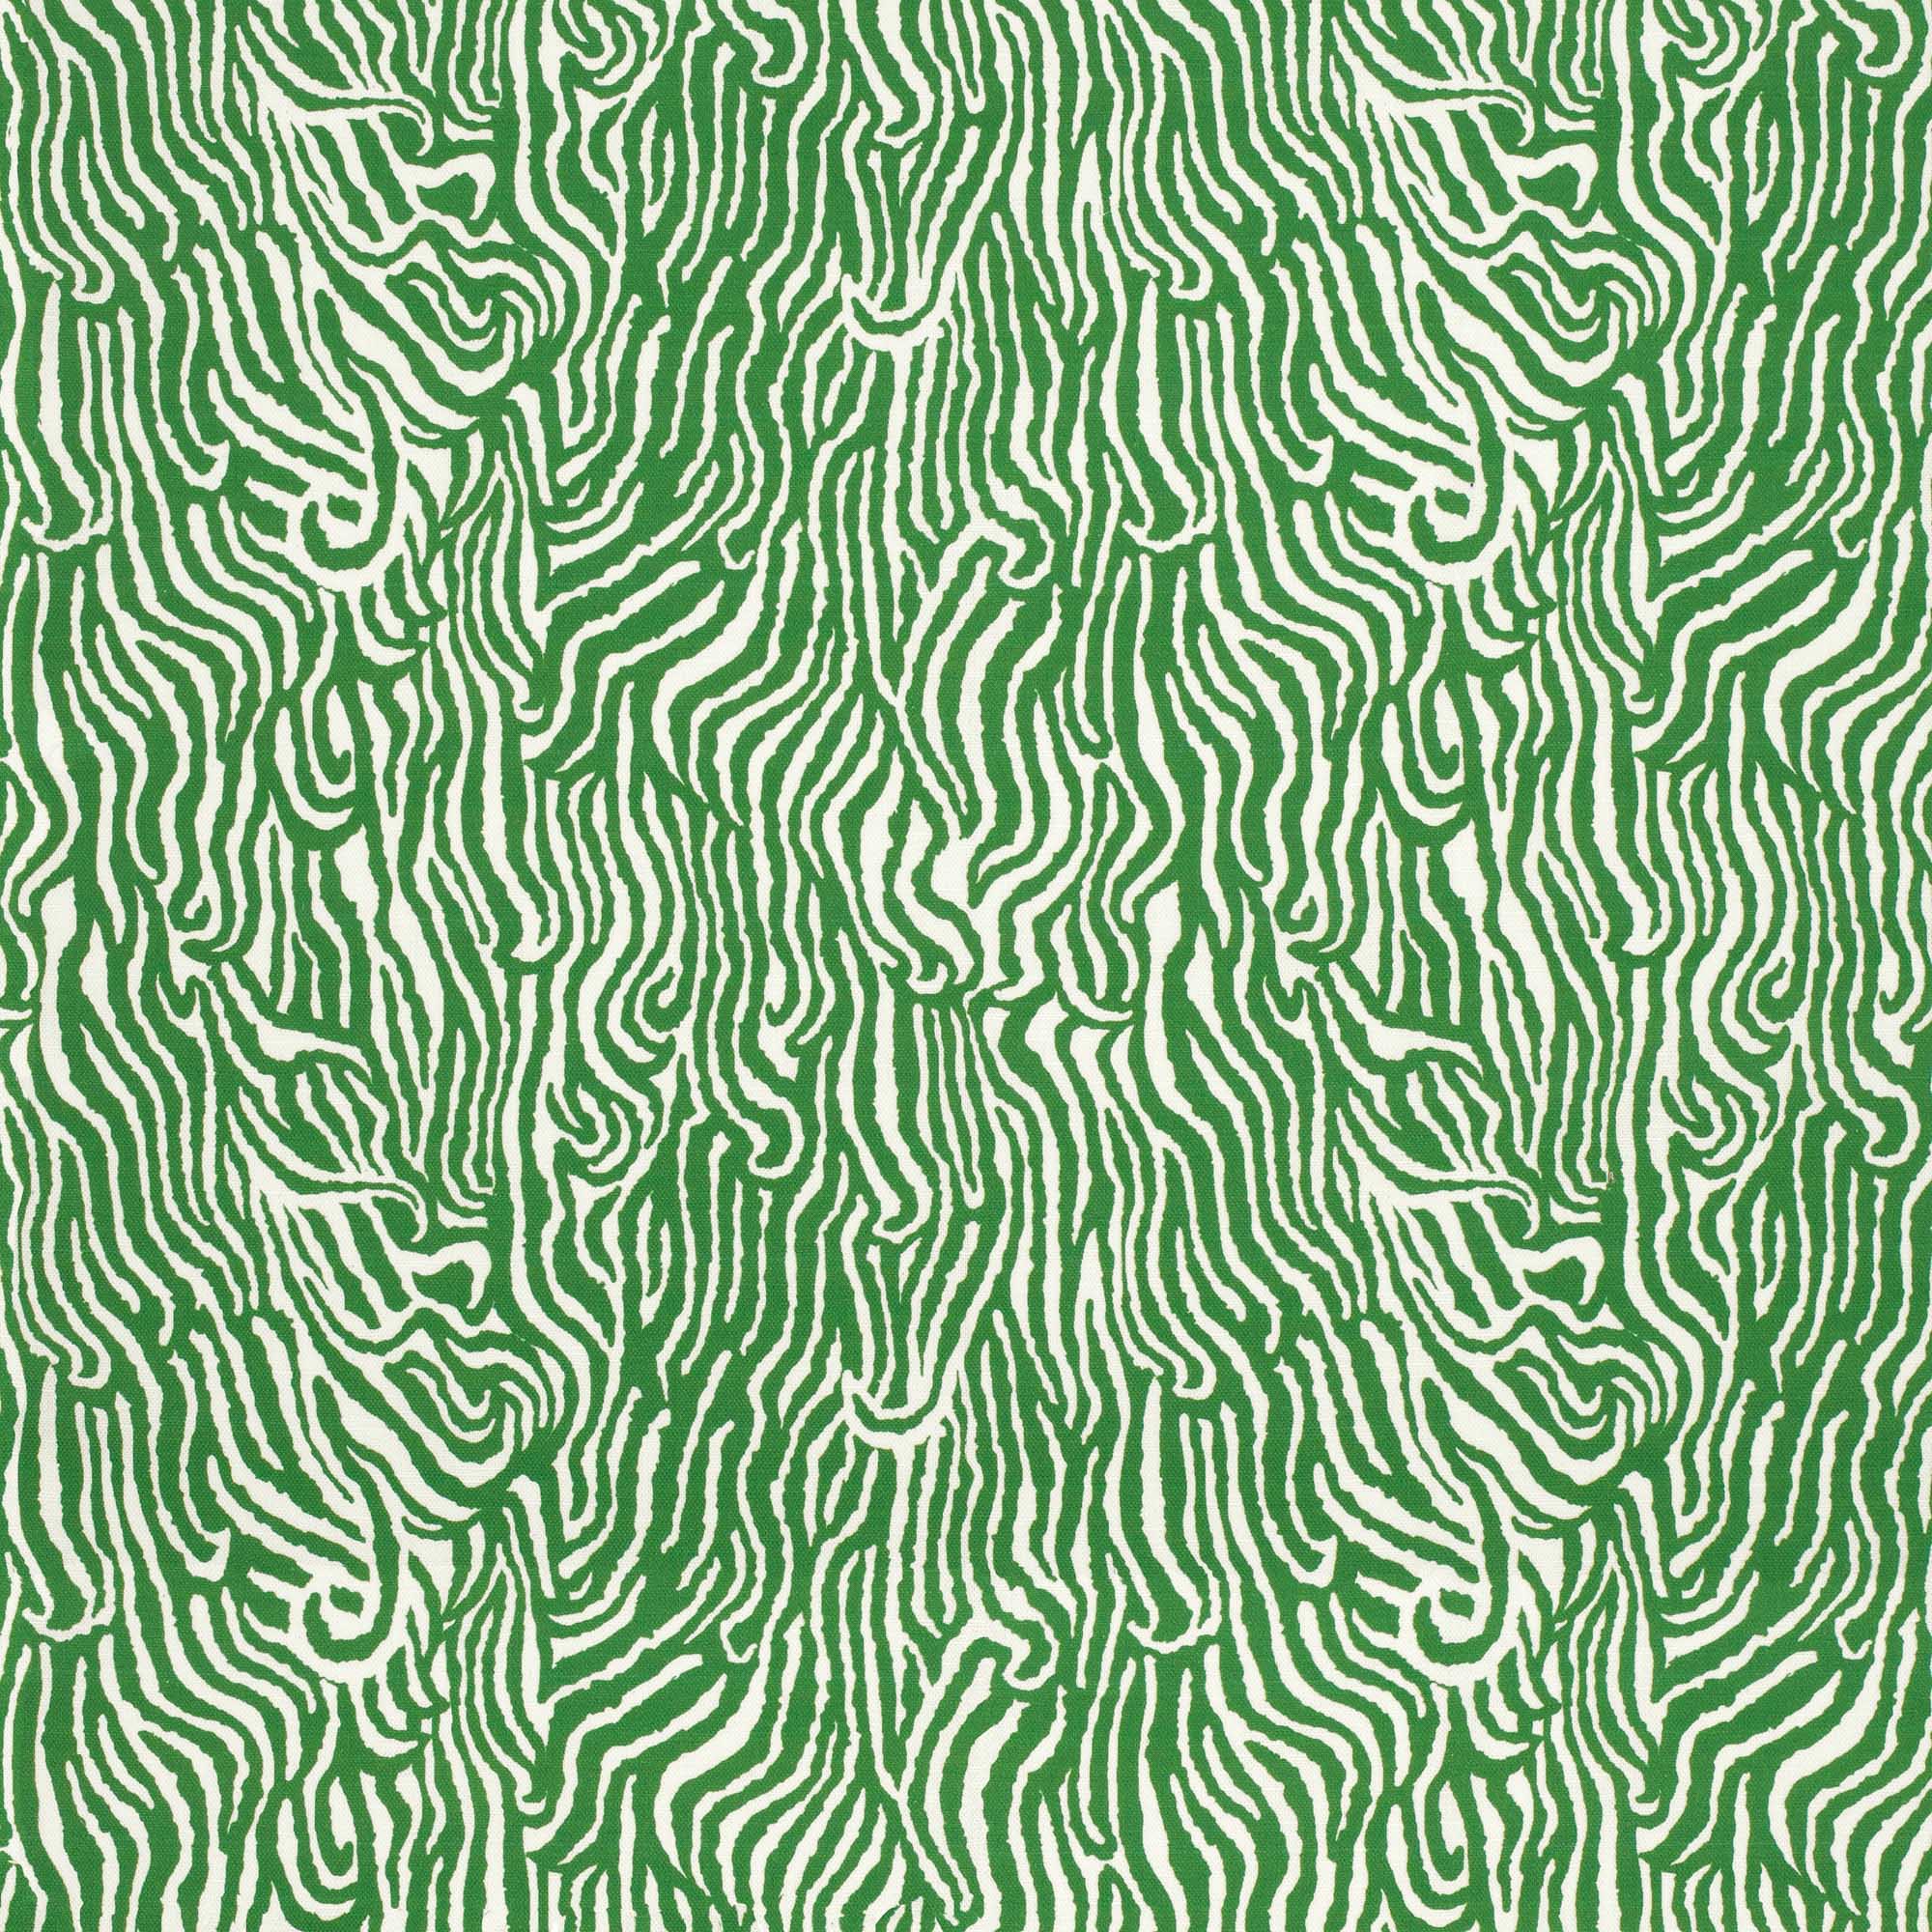 Detail of fabric in a playful animal print in green on a white field.